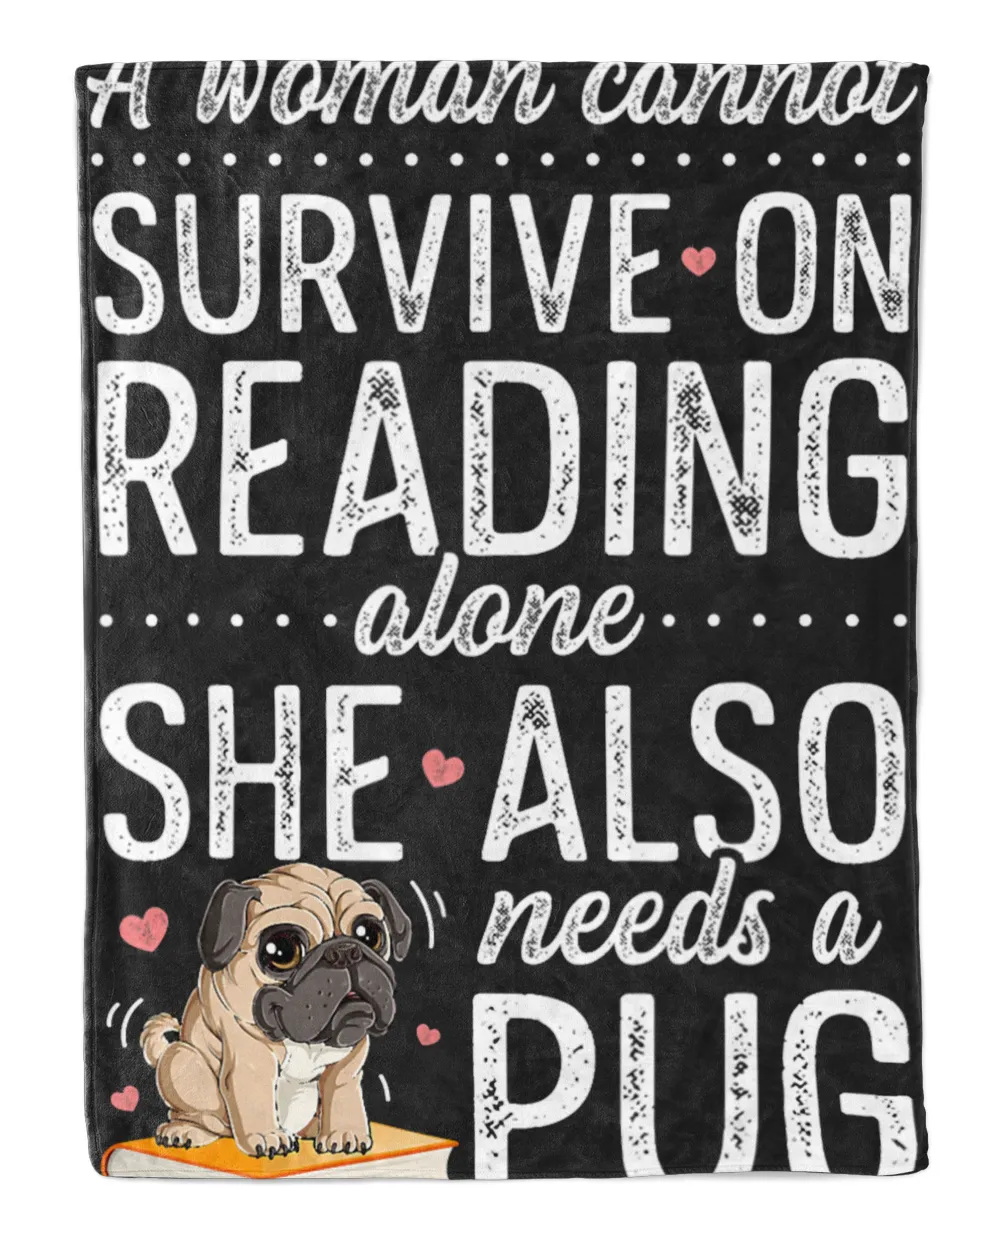 A Woman Cannot Survive On Reading Alone Funny Pug Book Lover